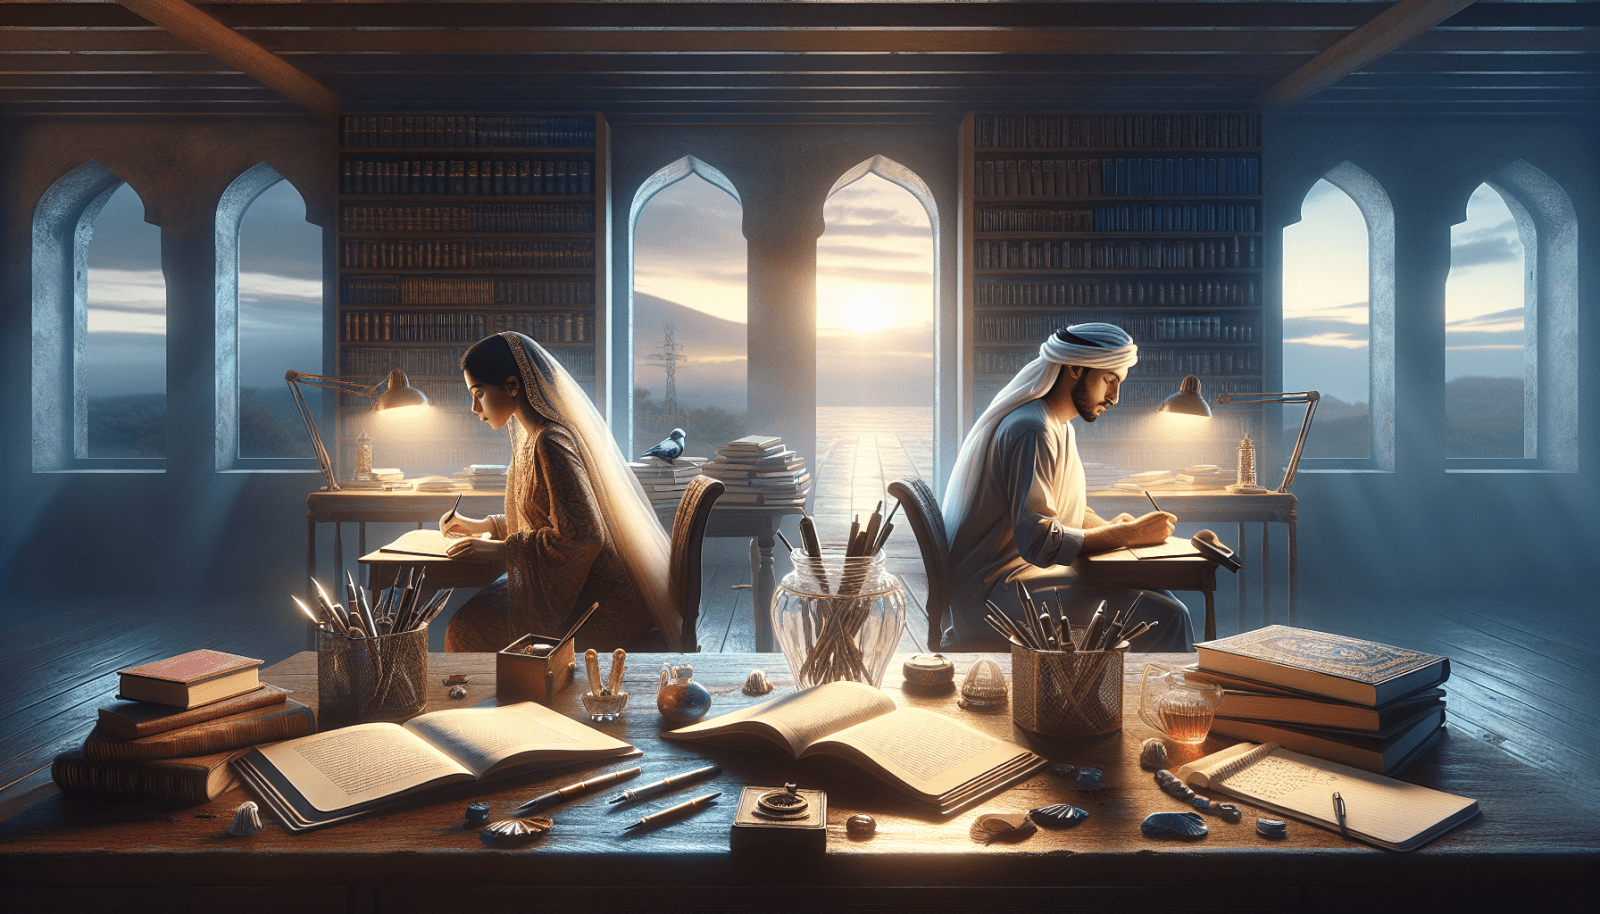 A man and a woman dressed in traditional Middle Eastern attire are studying at desks in a grand library with arched windows overlooking a sunset landscape. The room is filled with books, writing instruments, and lit lamps, creating an atmosphere of scholarly focus.